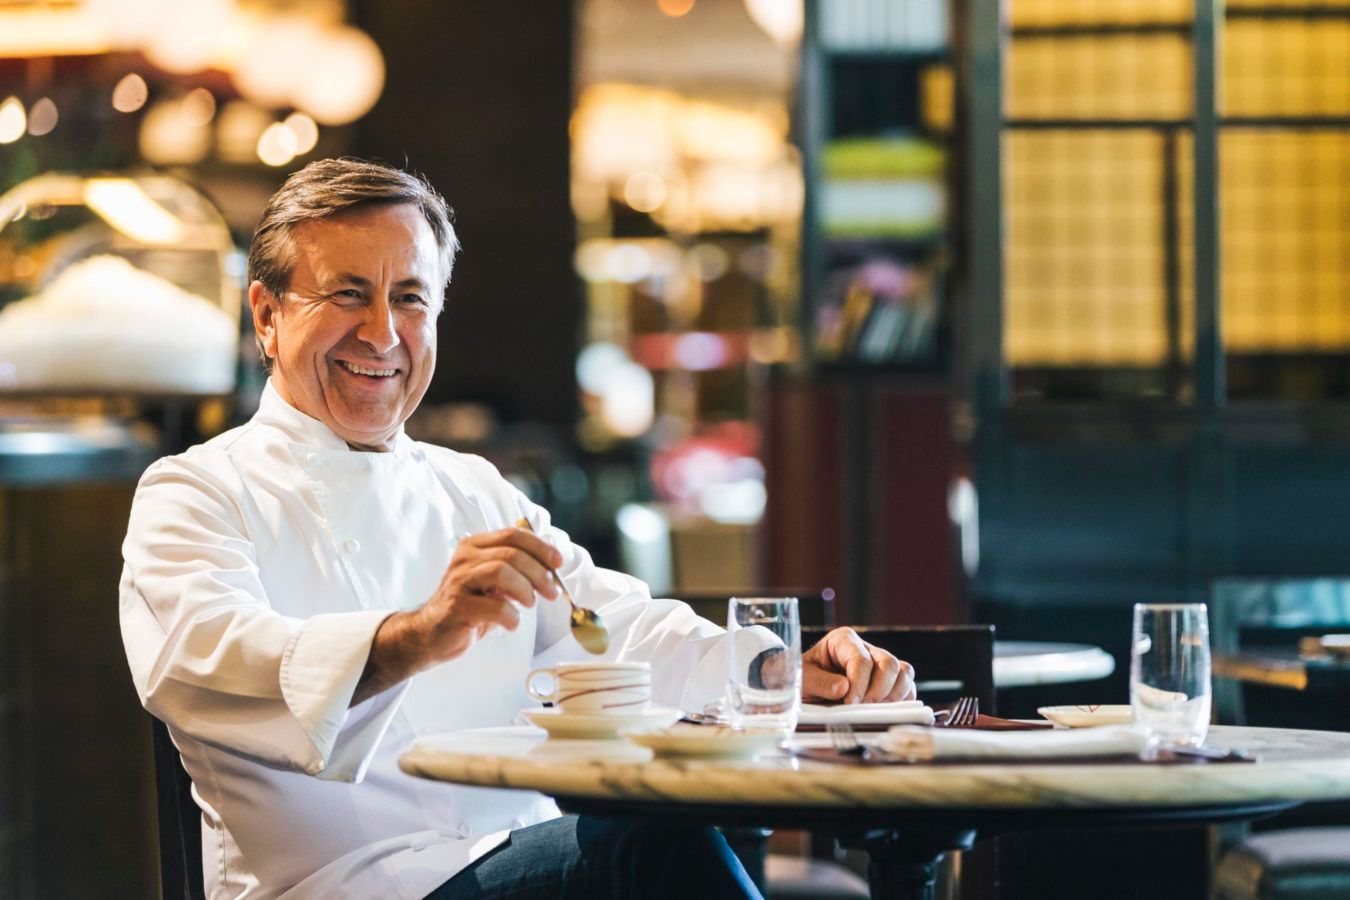 French chef Daniel Boulud of DB Bistro wants to please you